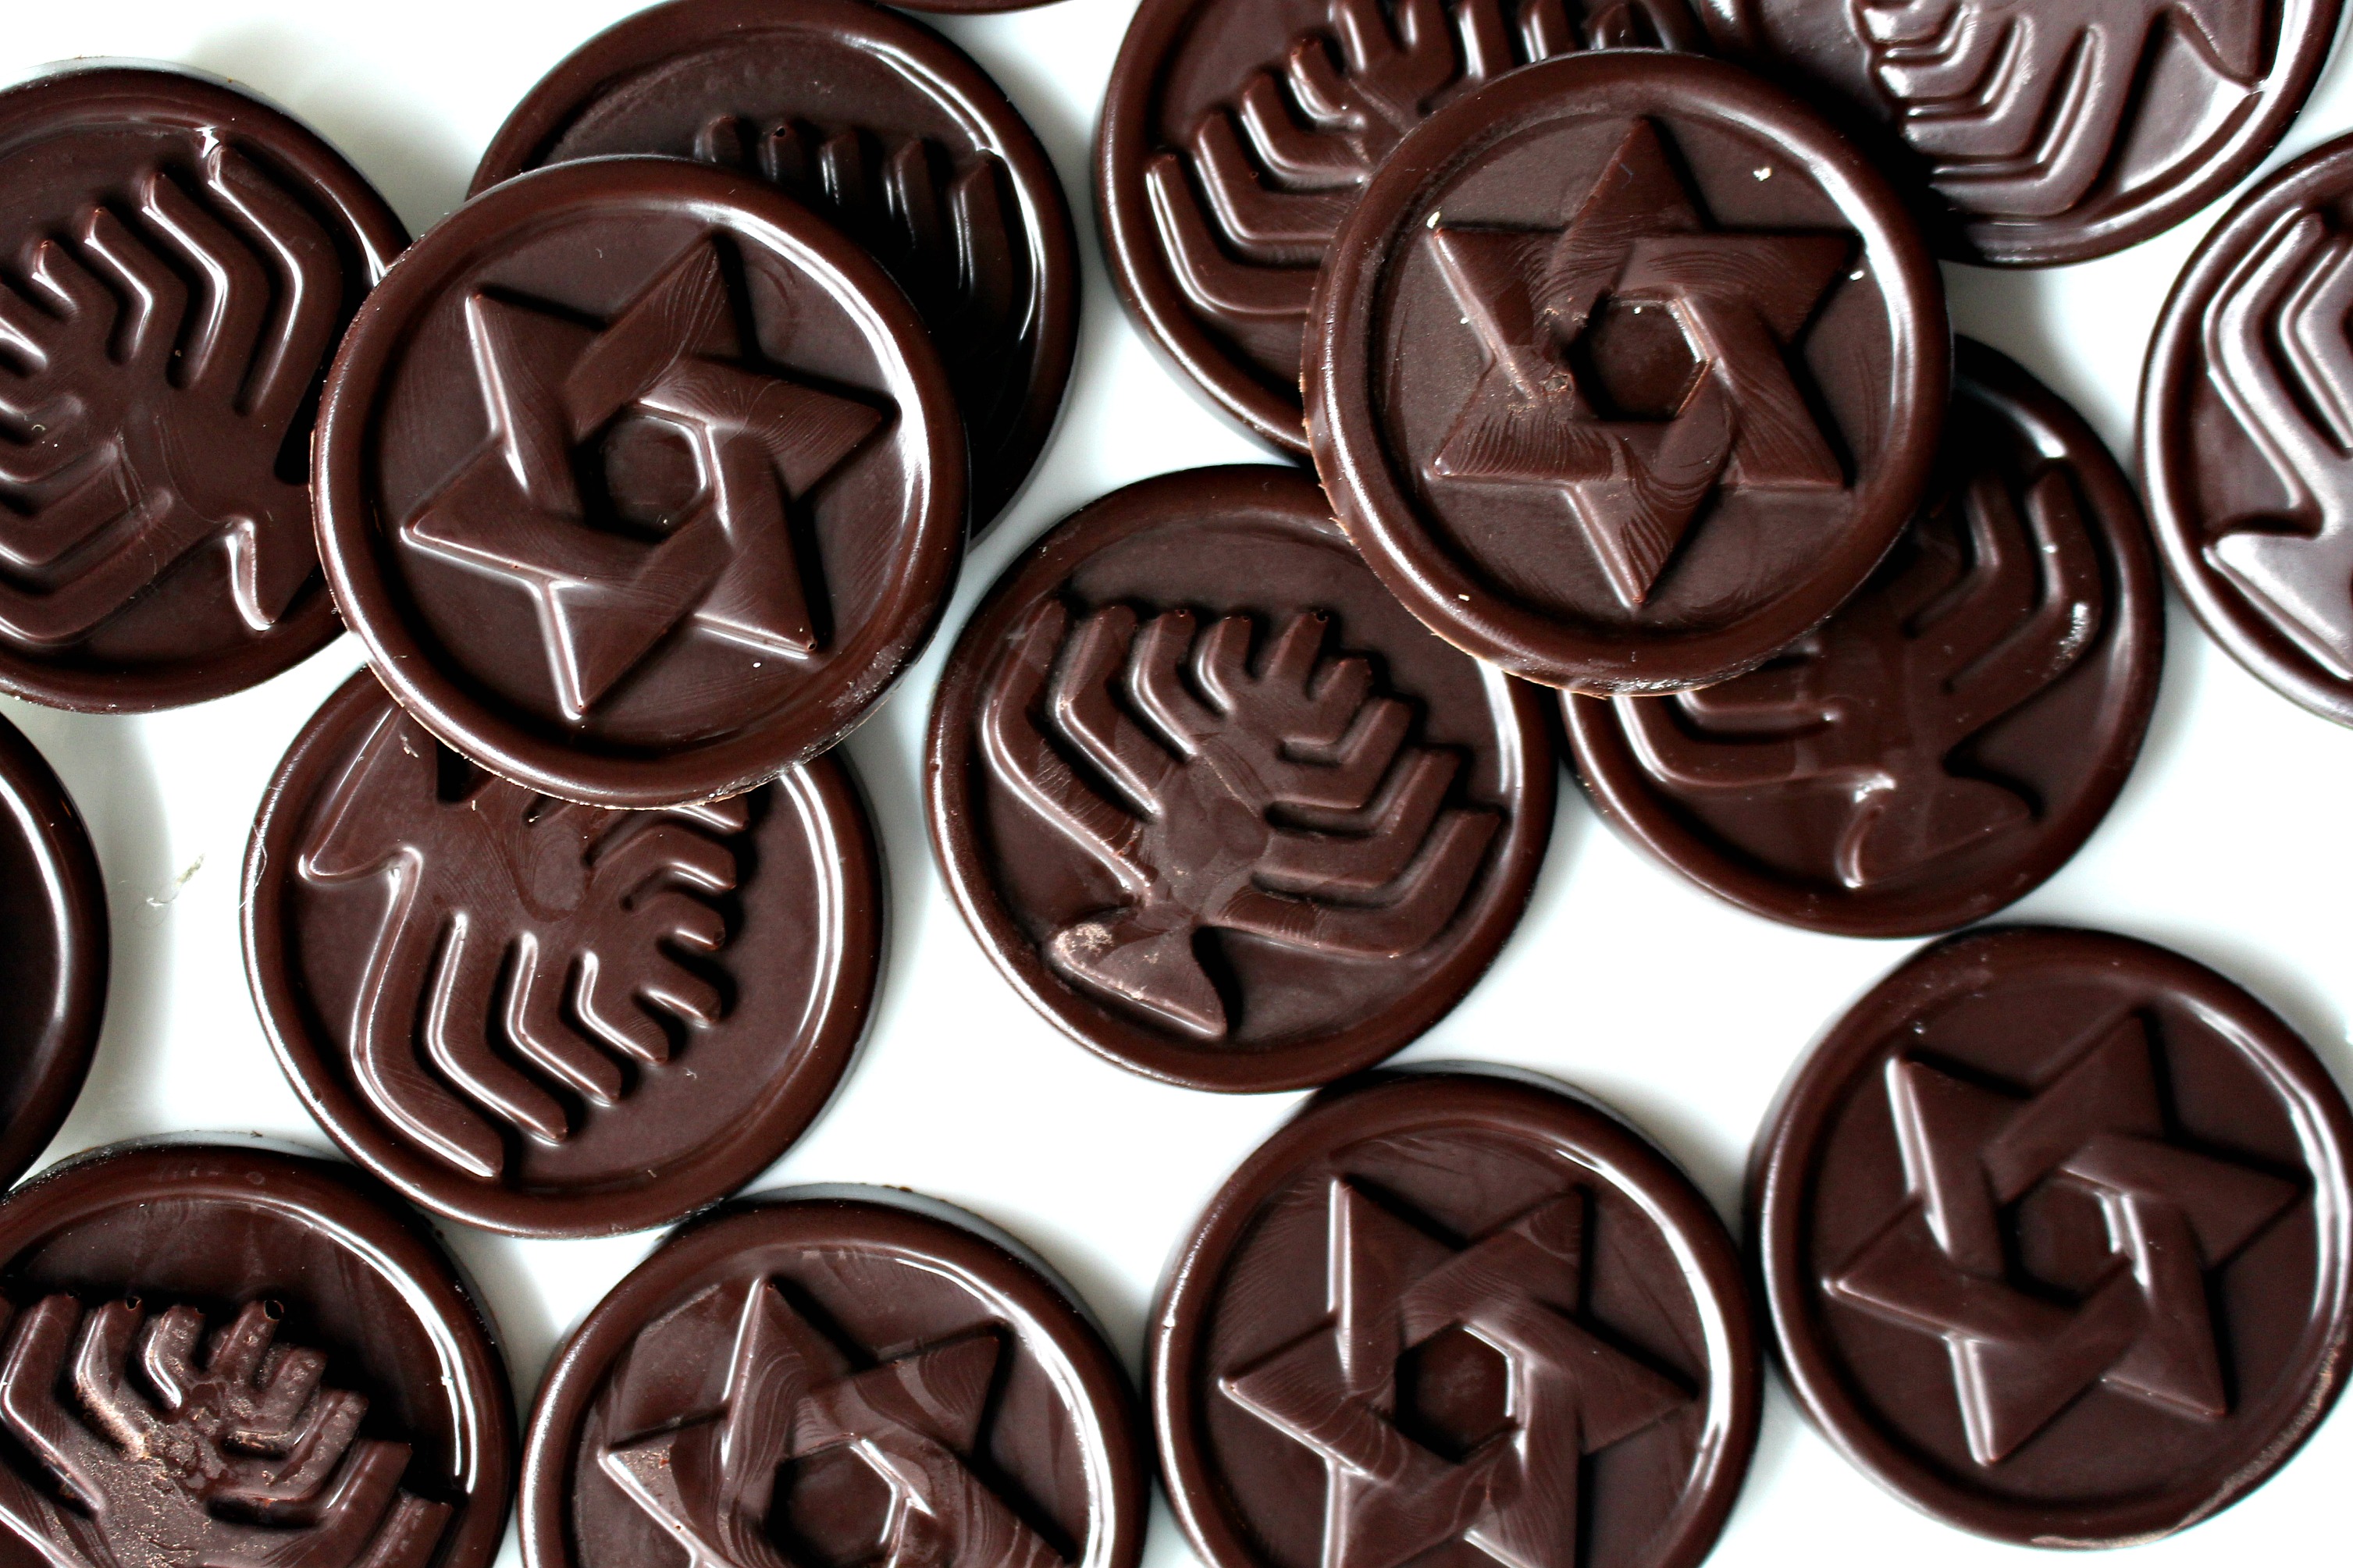 Chocolate Coins with molded Judaic designs